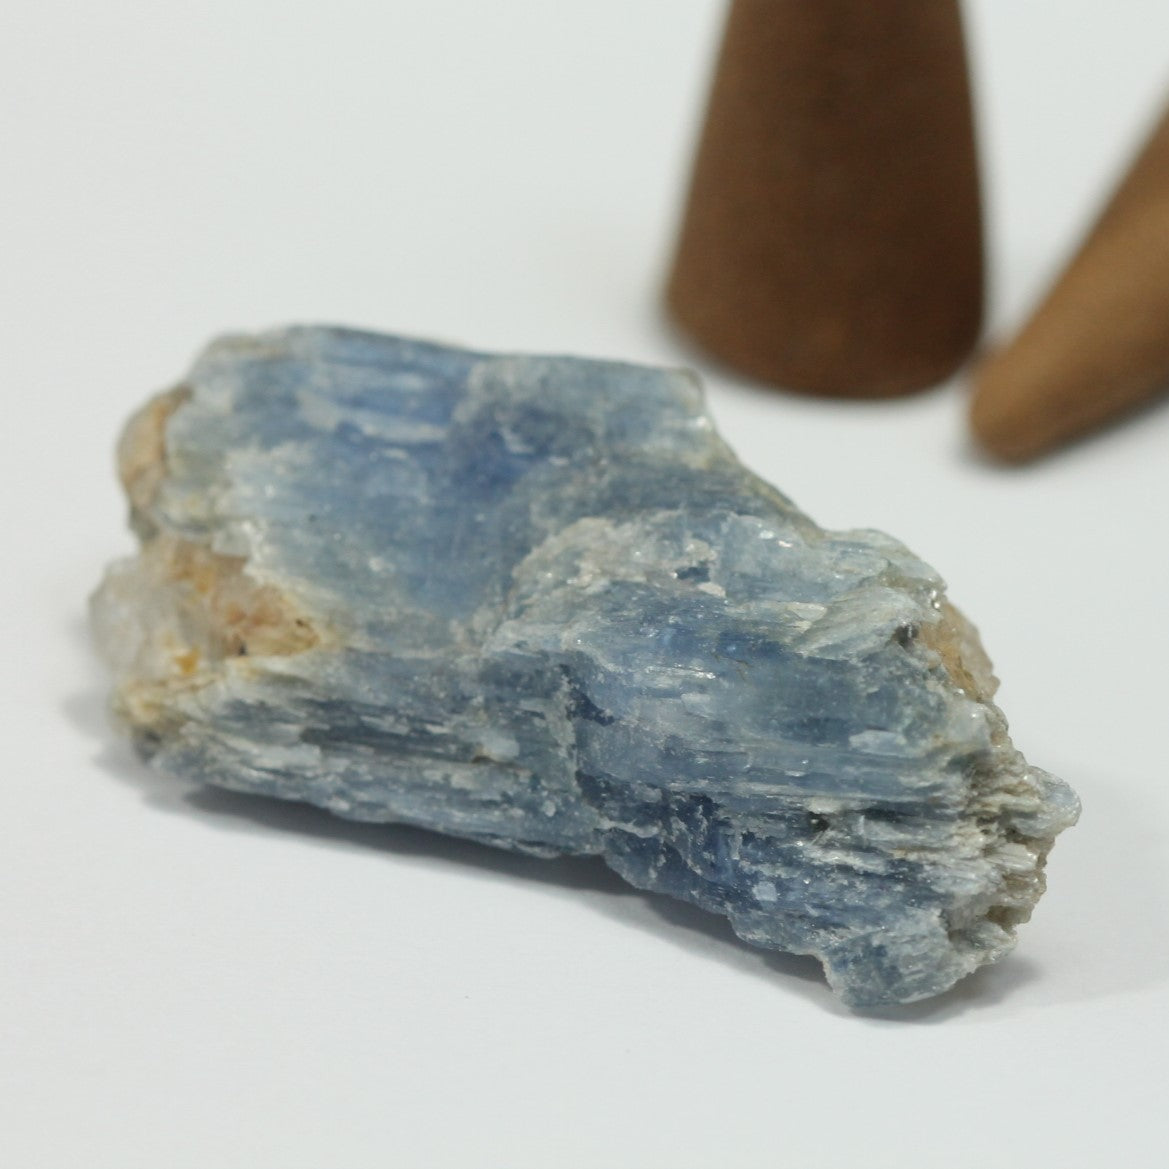 kyanite or sale by vermont crystal shop